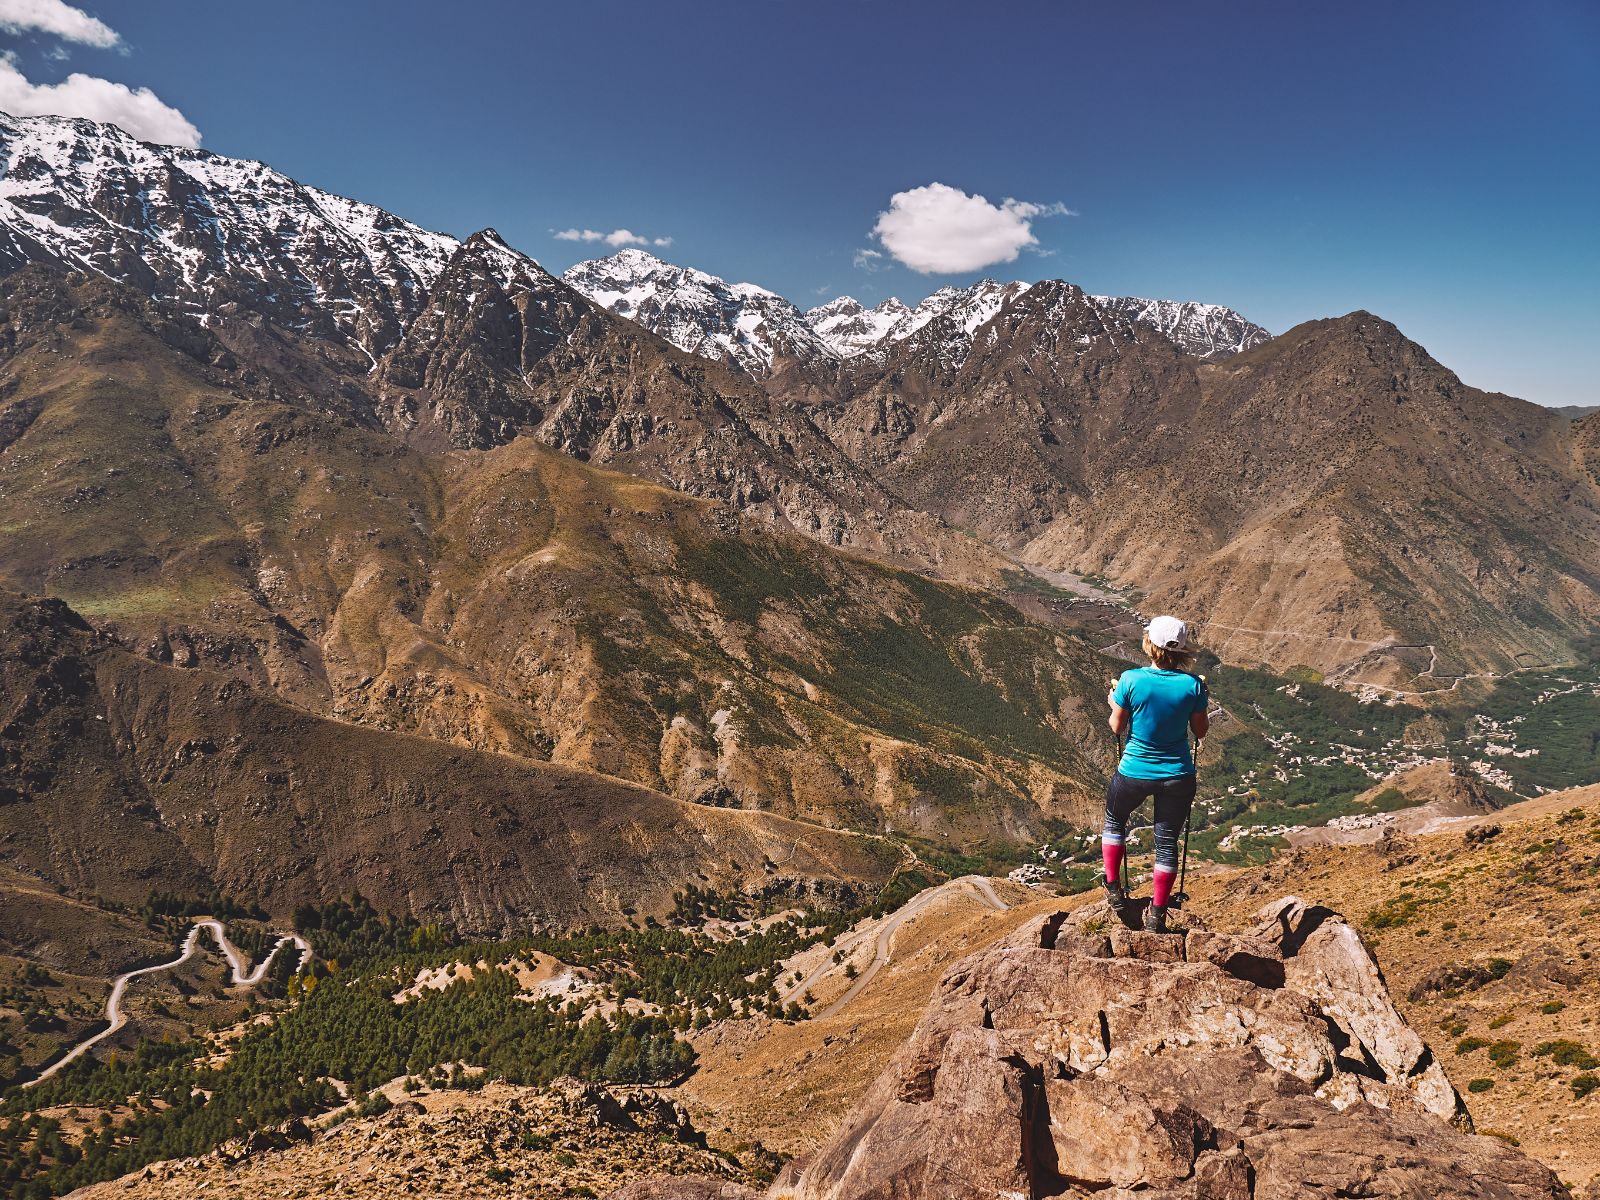 Climber at the summit of Mount Toubkal in Morocco